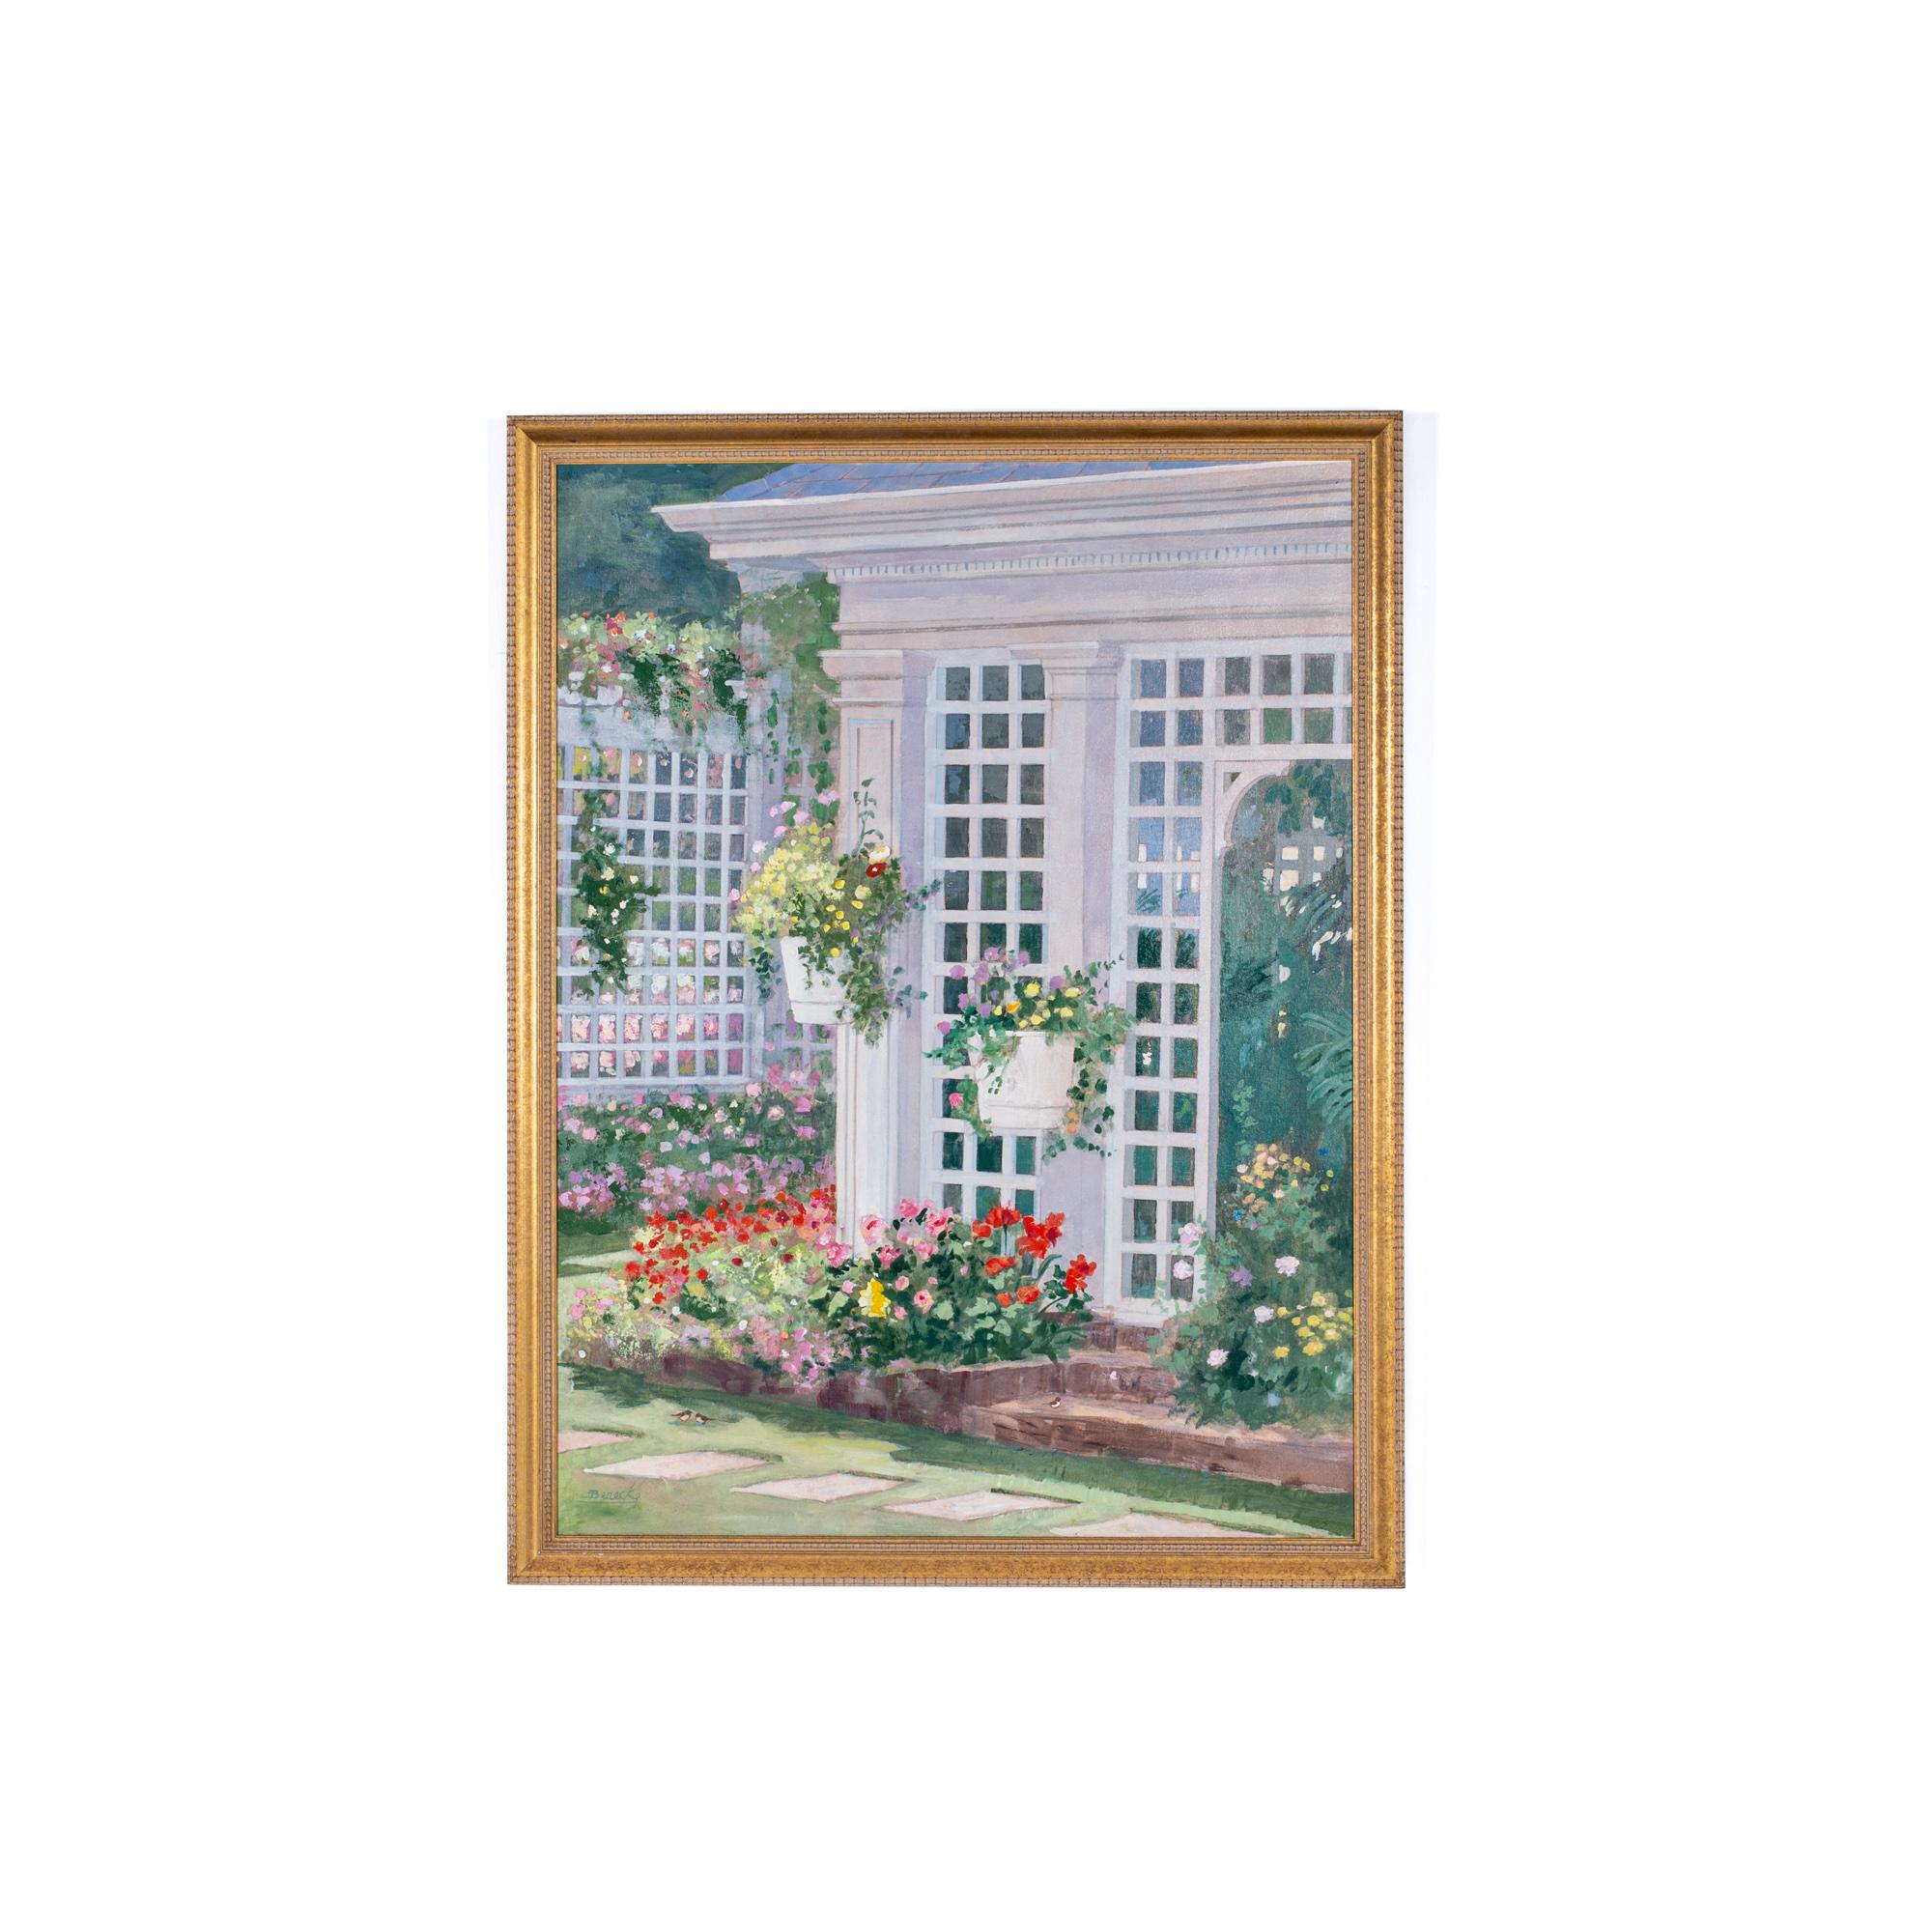 Framed Berecks garden print

This print is in great vintage condition with minor marks, dents, and wear.

We take our photos in a controlled lighting studio to show as much detail as possible. We do not photoshop out blemishes. 

We keep you